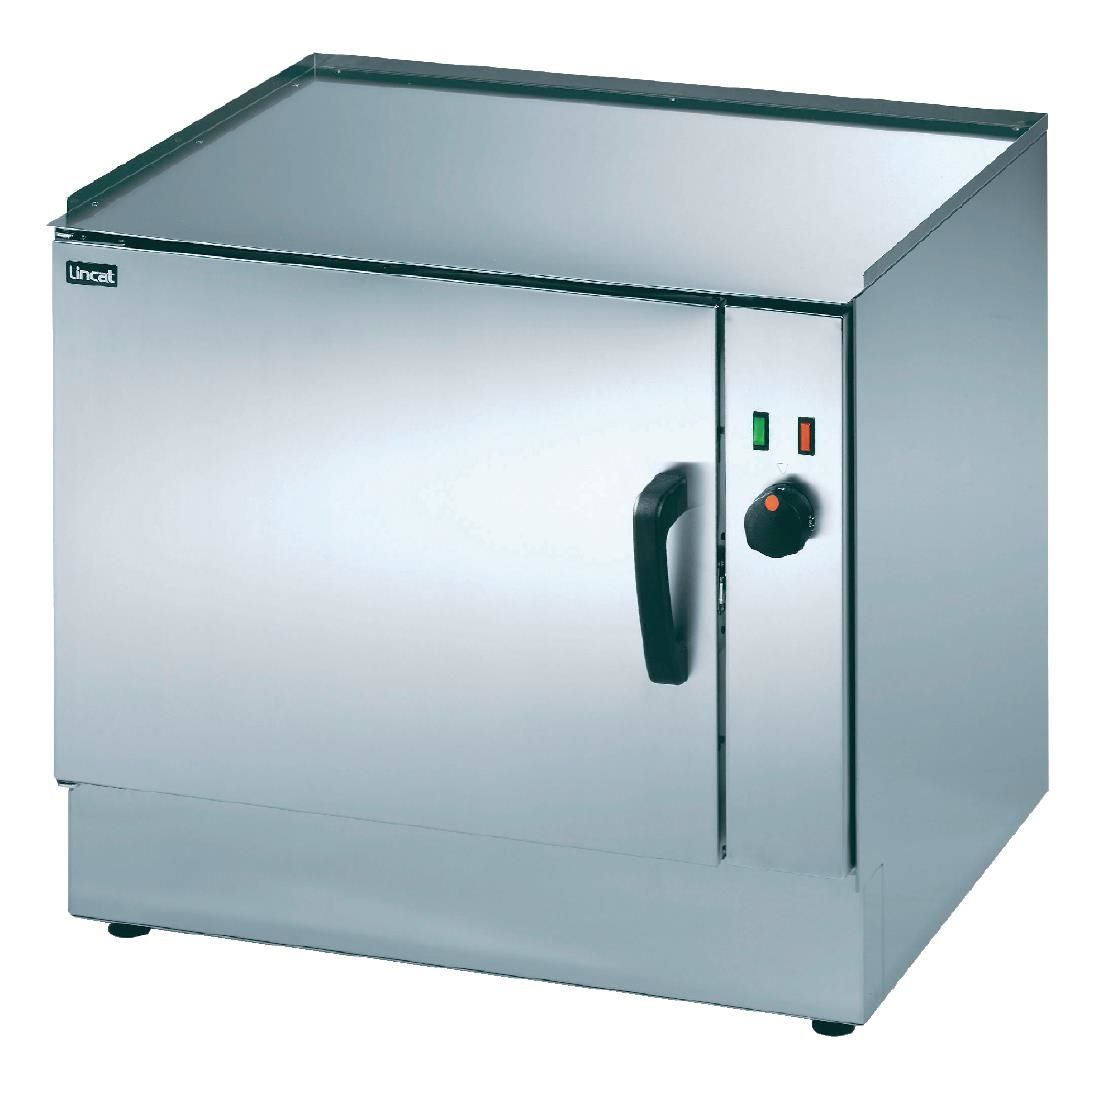 V7 - Lincat Silverlink 600 Electric Free-standing Oven - Larger size - W 750 mm - 3.0 kW